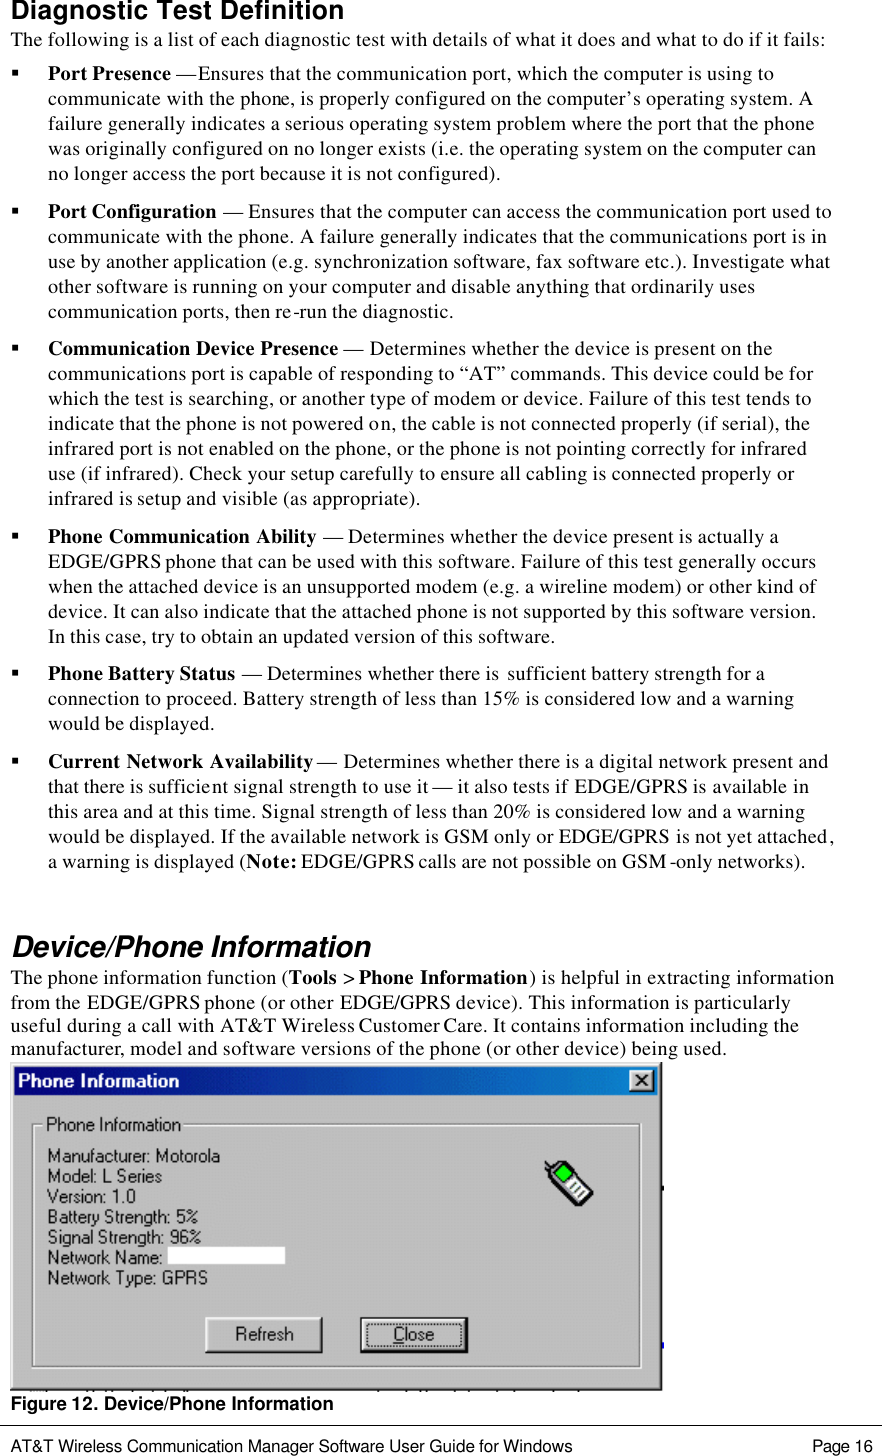   AT&amp;T Wireless Communication Manager Software User Guide for Windows    Page 16  Diagnostic Test Definition The following is a list of each diagnostic test with details of what it does and what to do if it fails: § Port Presence —Ensures that the communication port, which the computer is using to communicate with the phone, is properly configured on the computer’s operating system. A failure generally indicates a serious operating system problem where the port that the phone was originally configured on no longer exists (i.e. the operating system on the computer can no longer access the port because it is not configured).  § Port Configuration — Ensures that the computer can access the communication port used to communicate with the phone. A failure generally indicates that the communications port is in use by another application (e.g. synchronization software, fax software etc.). Investigate what other software is running on your computer and disable anything that ordinarily uses communication ports, then re-run the diagnostic.  § Communication Device Presence — Determines whether the device is present on the communications port is capable of responding to “AT” commands. This device could be for which the test is searching, or another type of modem or device. Failure of this test tends to indicate that the phone is not powered on, the cable is not connected properly (if serial), the infrared port is not enabled on the phone, or the phone is not pointing correctly for infrared use (if infrared). Check your setup carefully to ensure all cabling is connected properly or infrared is setup and visible (as appropriate).  § Phone Communication Ability — Determines whether the device present is actually a EDGE/GPRS phone that can be used with this software. Failure of this test generally occurs when the attached device is an unsupported modem (e.g. a wireline modem) or other kind of device. It can also indicate that the attached phone is not supported by this software version. In this case, try to obtain an updated version of this software.  § Phone Battery Status — Determines whether there is  sufficient battery strength for a connection to proceed. Battery strength of less than 15% is considered low and a warning would be displayed.  § Current Network Availability — Determines whether there is a digital network present and that there is sufficient signal strength to use it — it also tests if EDGE/GPRS is available in this area and at this time. Signal strength of less than 20% is considered low and a warning would be displayed. If the available network is GSM only or EDGE/GPRS is not yet attached, a warning is displayed (Note: EDGE/GPRS calls are not possible on GSM -only networks).  Device/Phone Information The phone information function (Tools &gt; Phone Information) is helpful in extracting information from the EDGE/GPRS phone (or other EDGE/GPRS device). This information is particularly useful during a call with AT&amp;T Wireless Customer Care. It contains information including the manufacturer, model and software versions of the phone (or other device) being used.  Figure 12. Device/Phone Information 